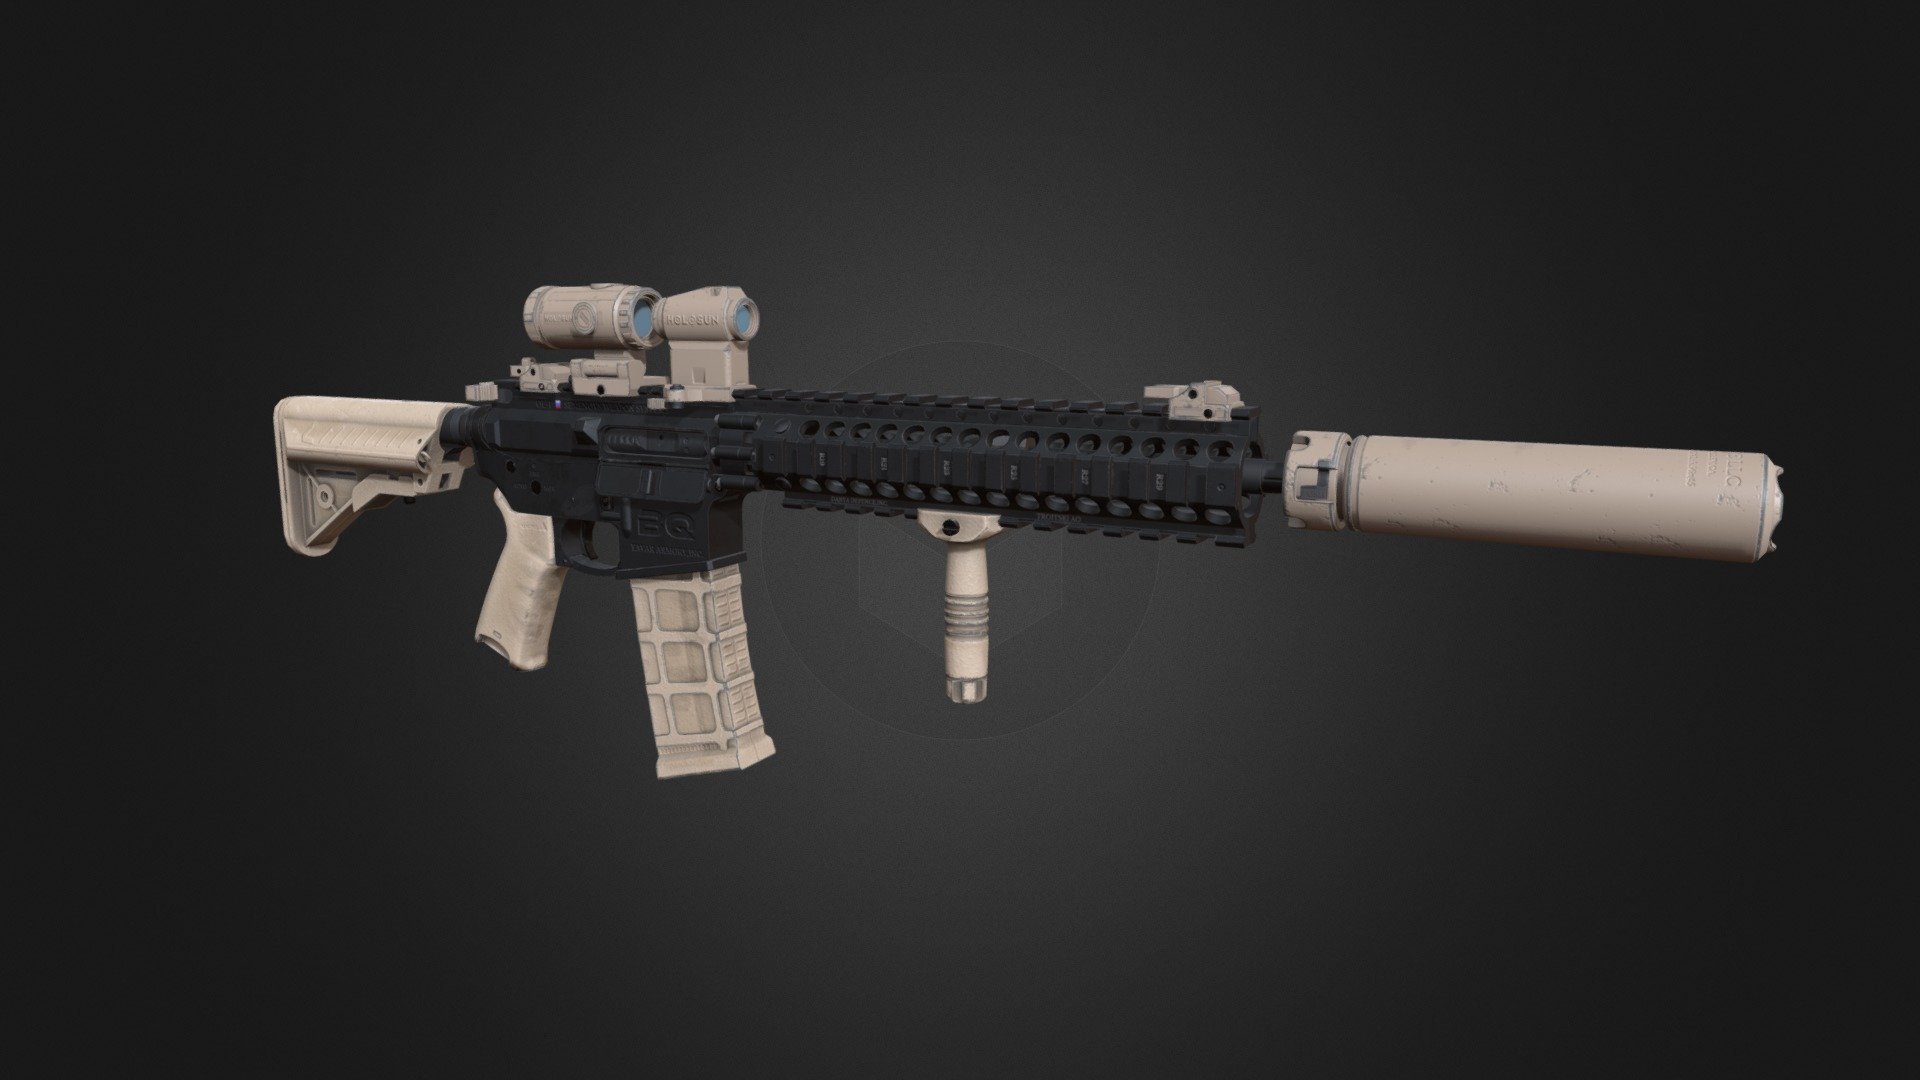 Made with Blender and Substance Painter.

Around 60 000 faces - AR-15 - Download Free 3D model by Se_Oscar_Ya 3d model